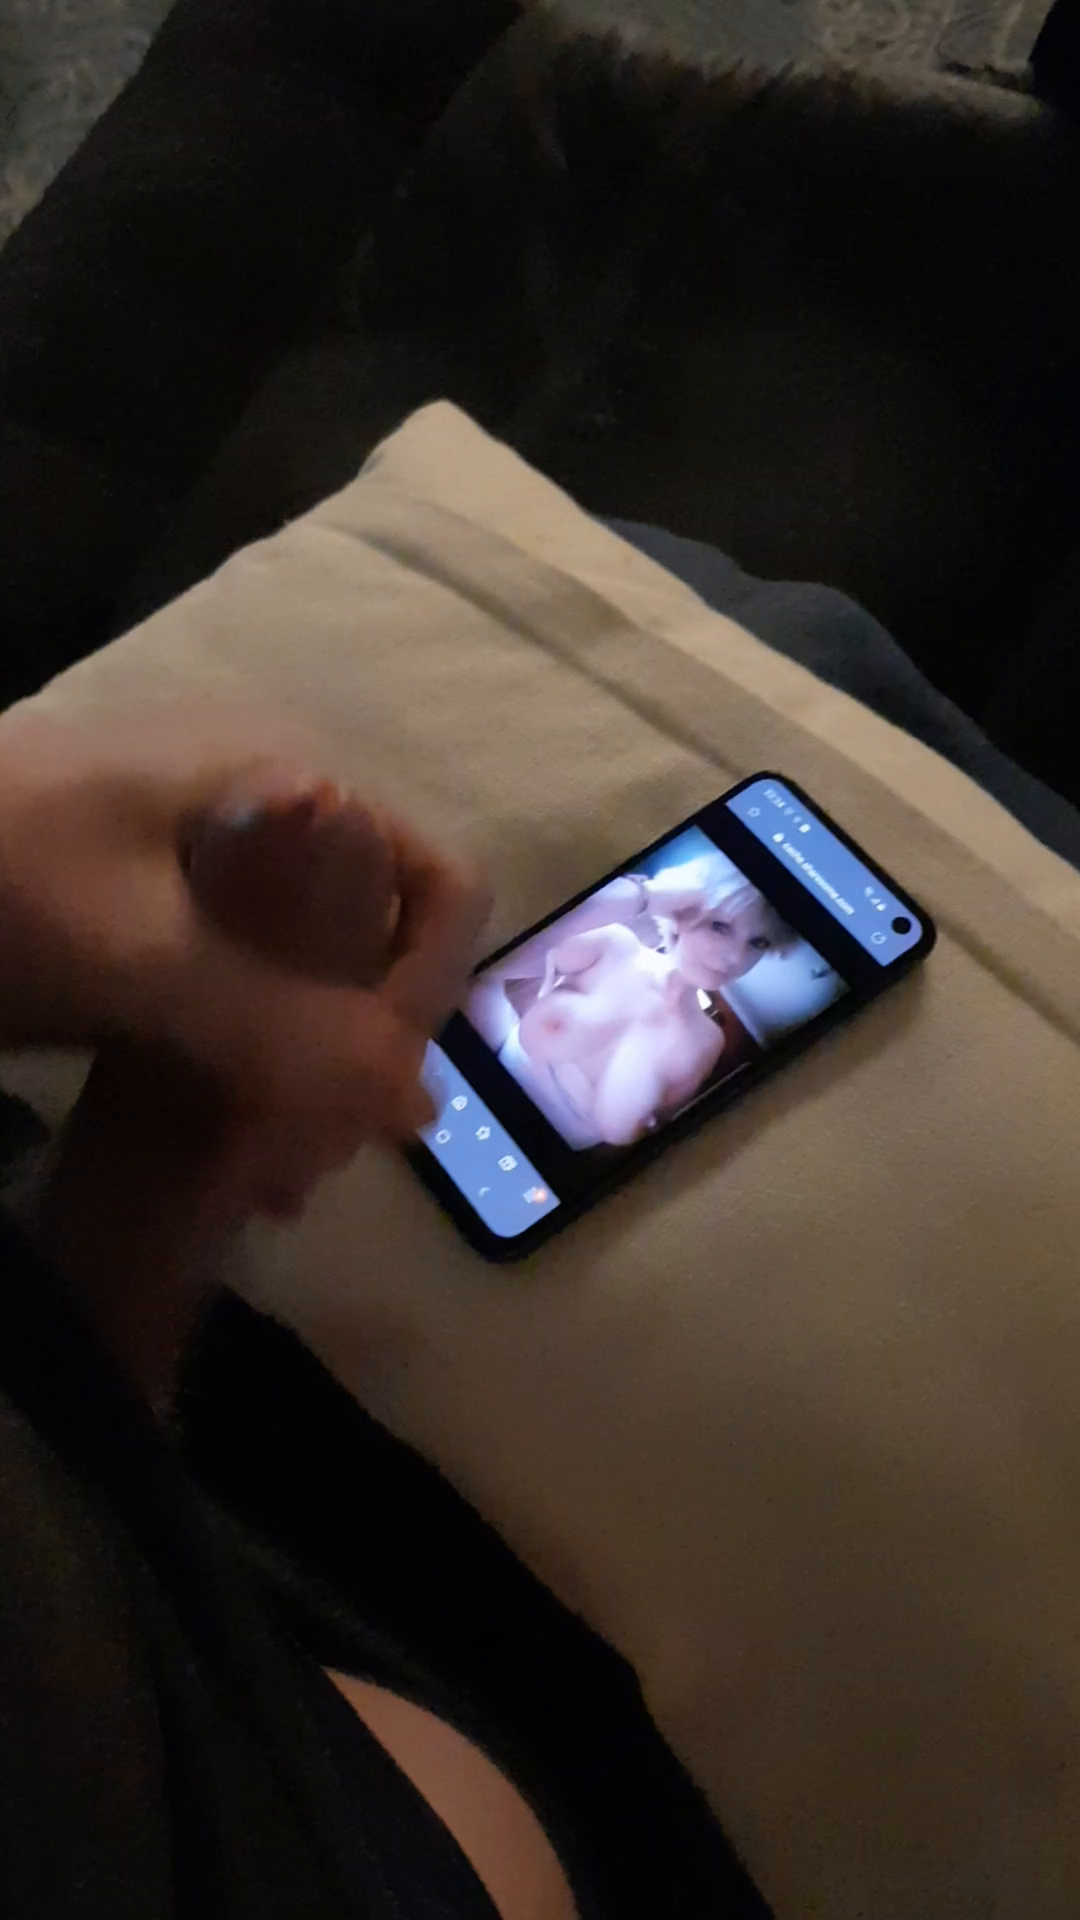 Video by Hwyljones with the username @Hwyljones,  November 24, 2019 at 6:35 PM. The post is about the topic Cum tributes and the text says '@missterri you make me so hard I was dripping with precum just looking at your tits, make me something special to watch me cum all over you 😍😍'